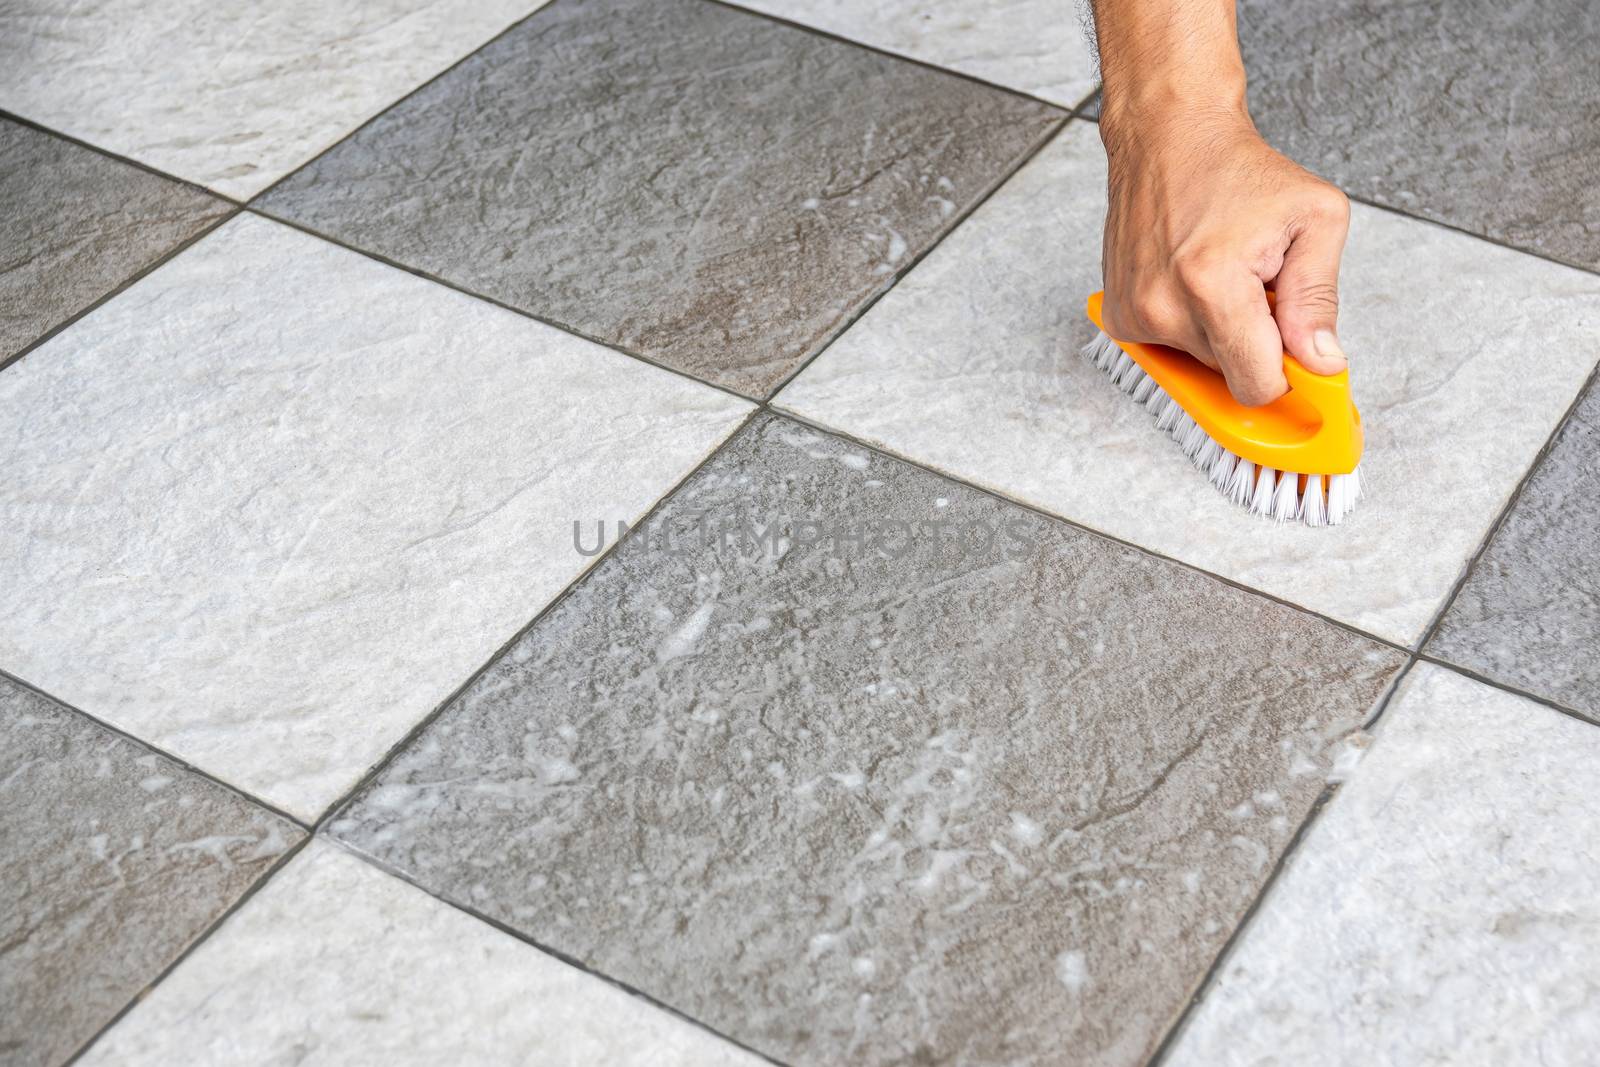 Men's hands are used to convert polishing cleaning on the tile floor.